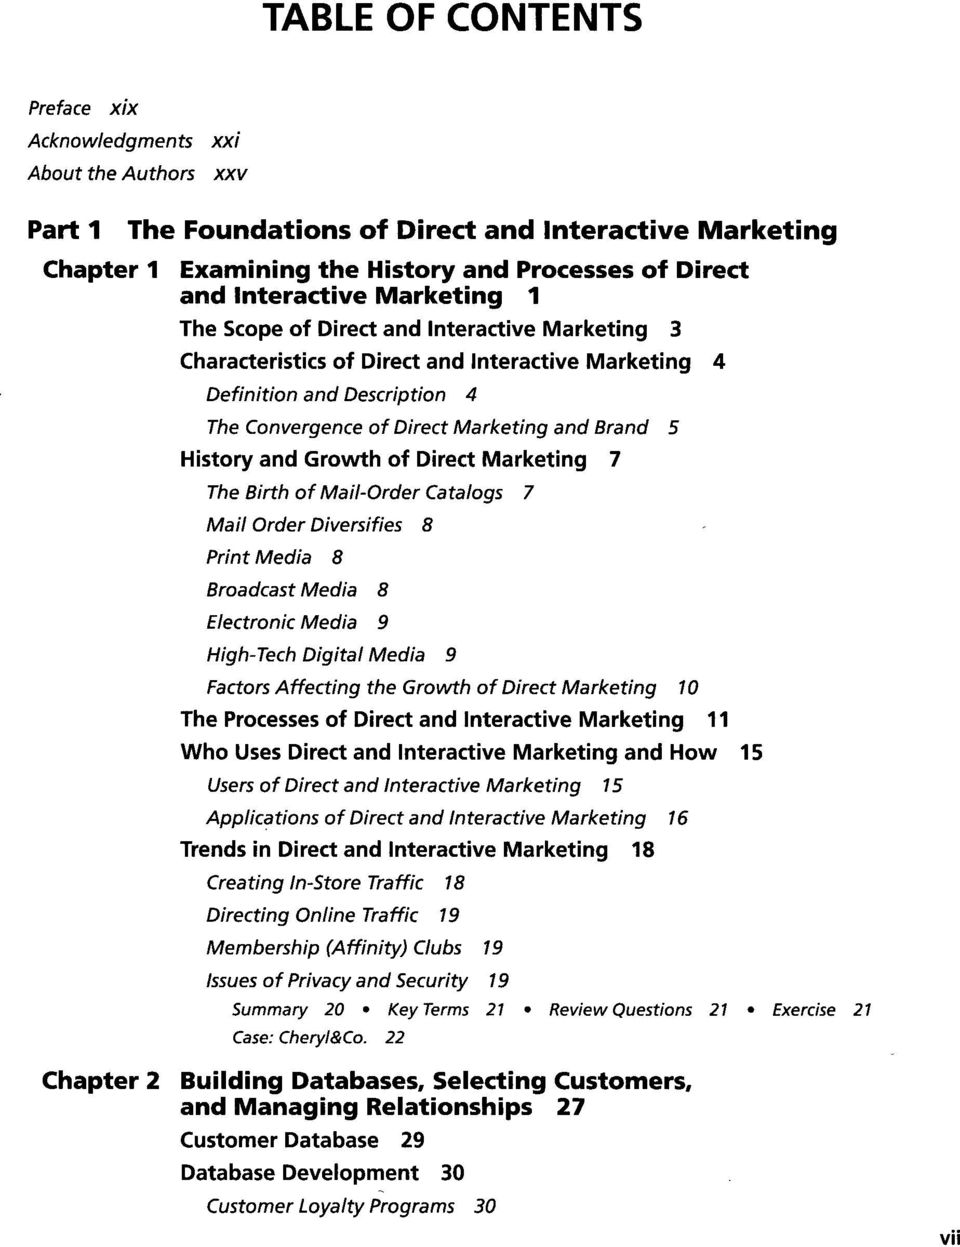 Brand 5 History and Growth of Direct Marketing 7 The Birth of Mail-Order Catalogs 7 Mail Order Diversifies 8 Print Media 8 Broadcast Media 8 Electronic Media 9 High-Tech Digital Media 9 Factors